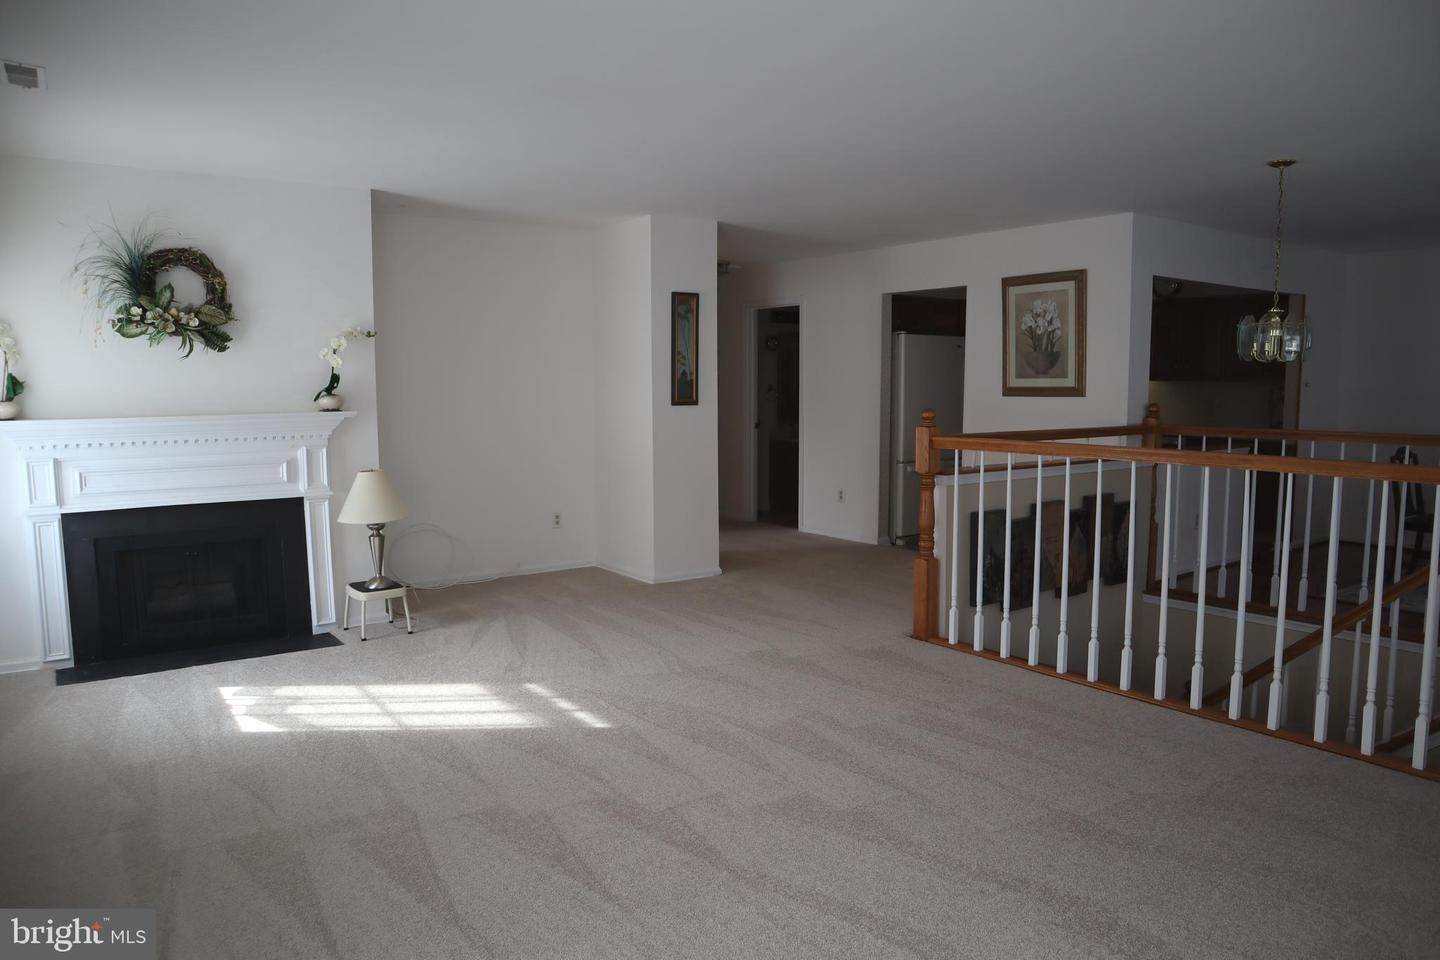 2. Condominiums for Sale at 727 WESTFIELD Drive Cinnaminson, New Jersey 08077 United States